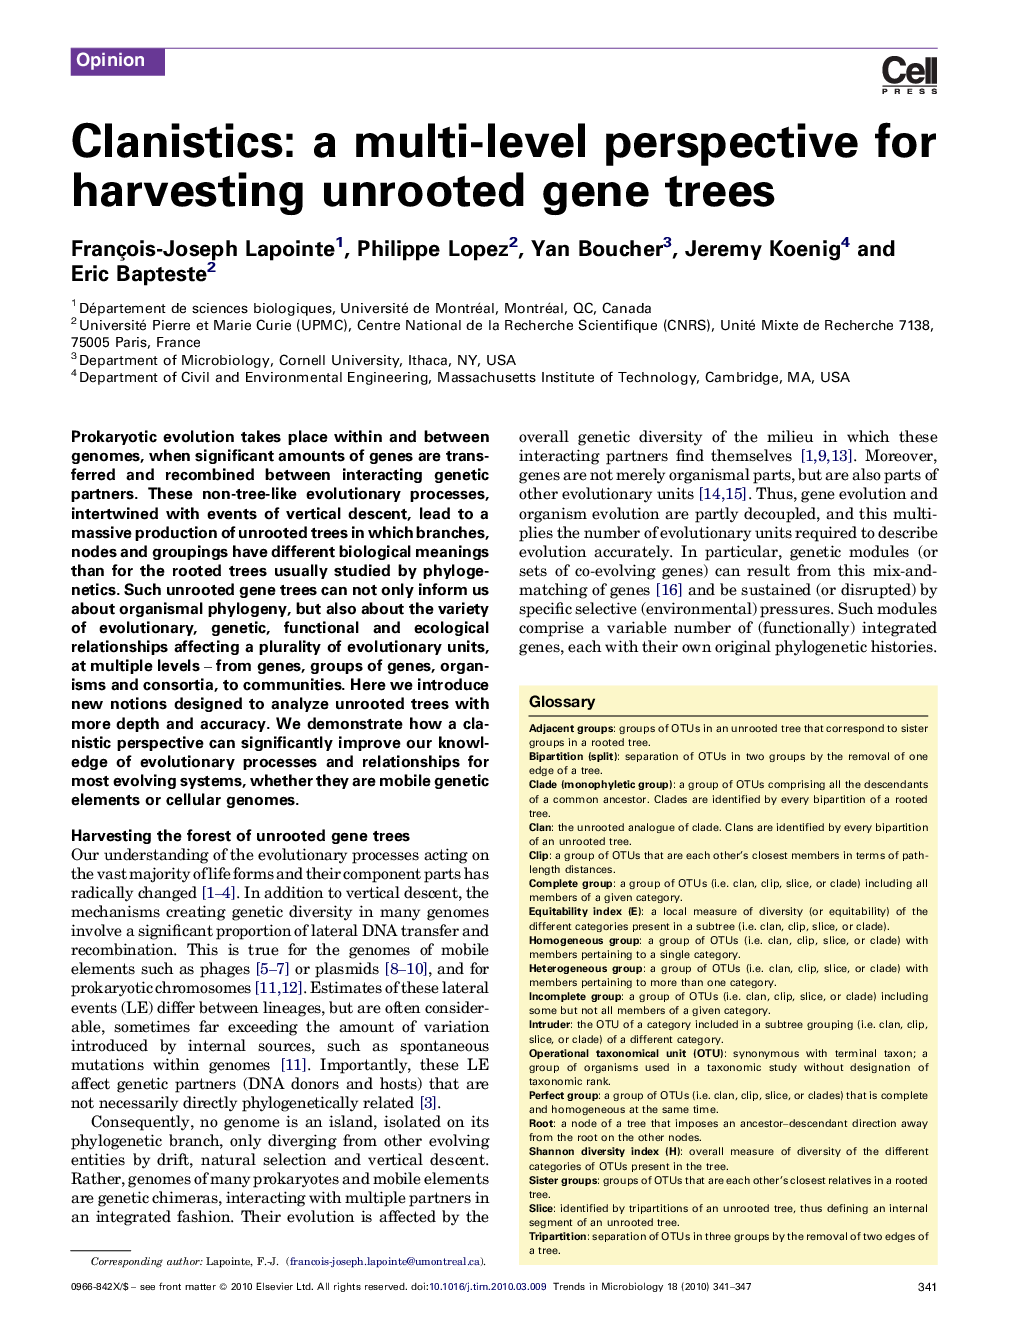 Clanistics: a multi-level perspective for harvesting unrooted gene trees